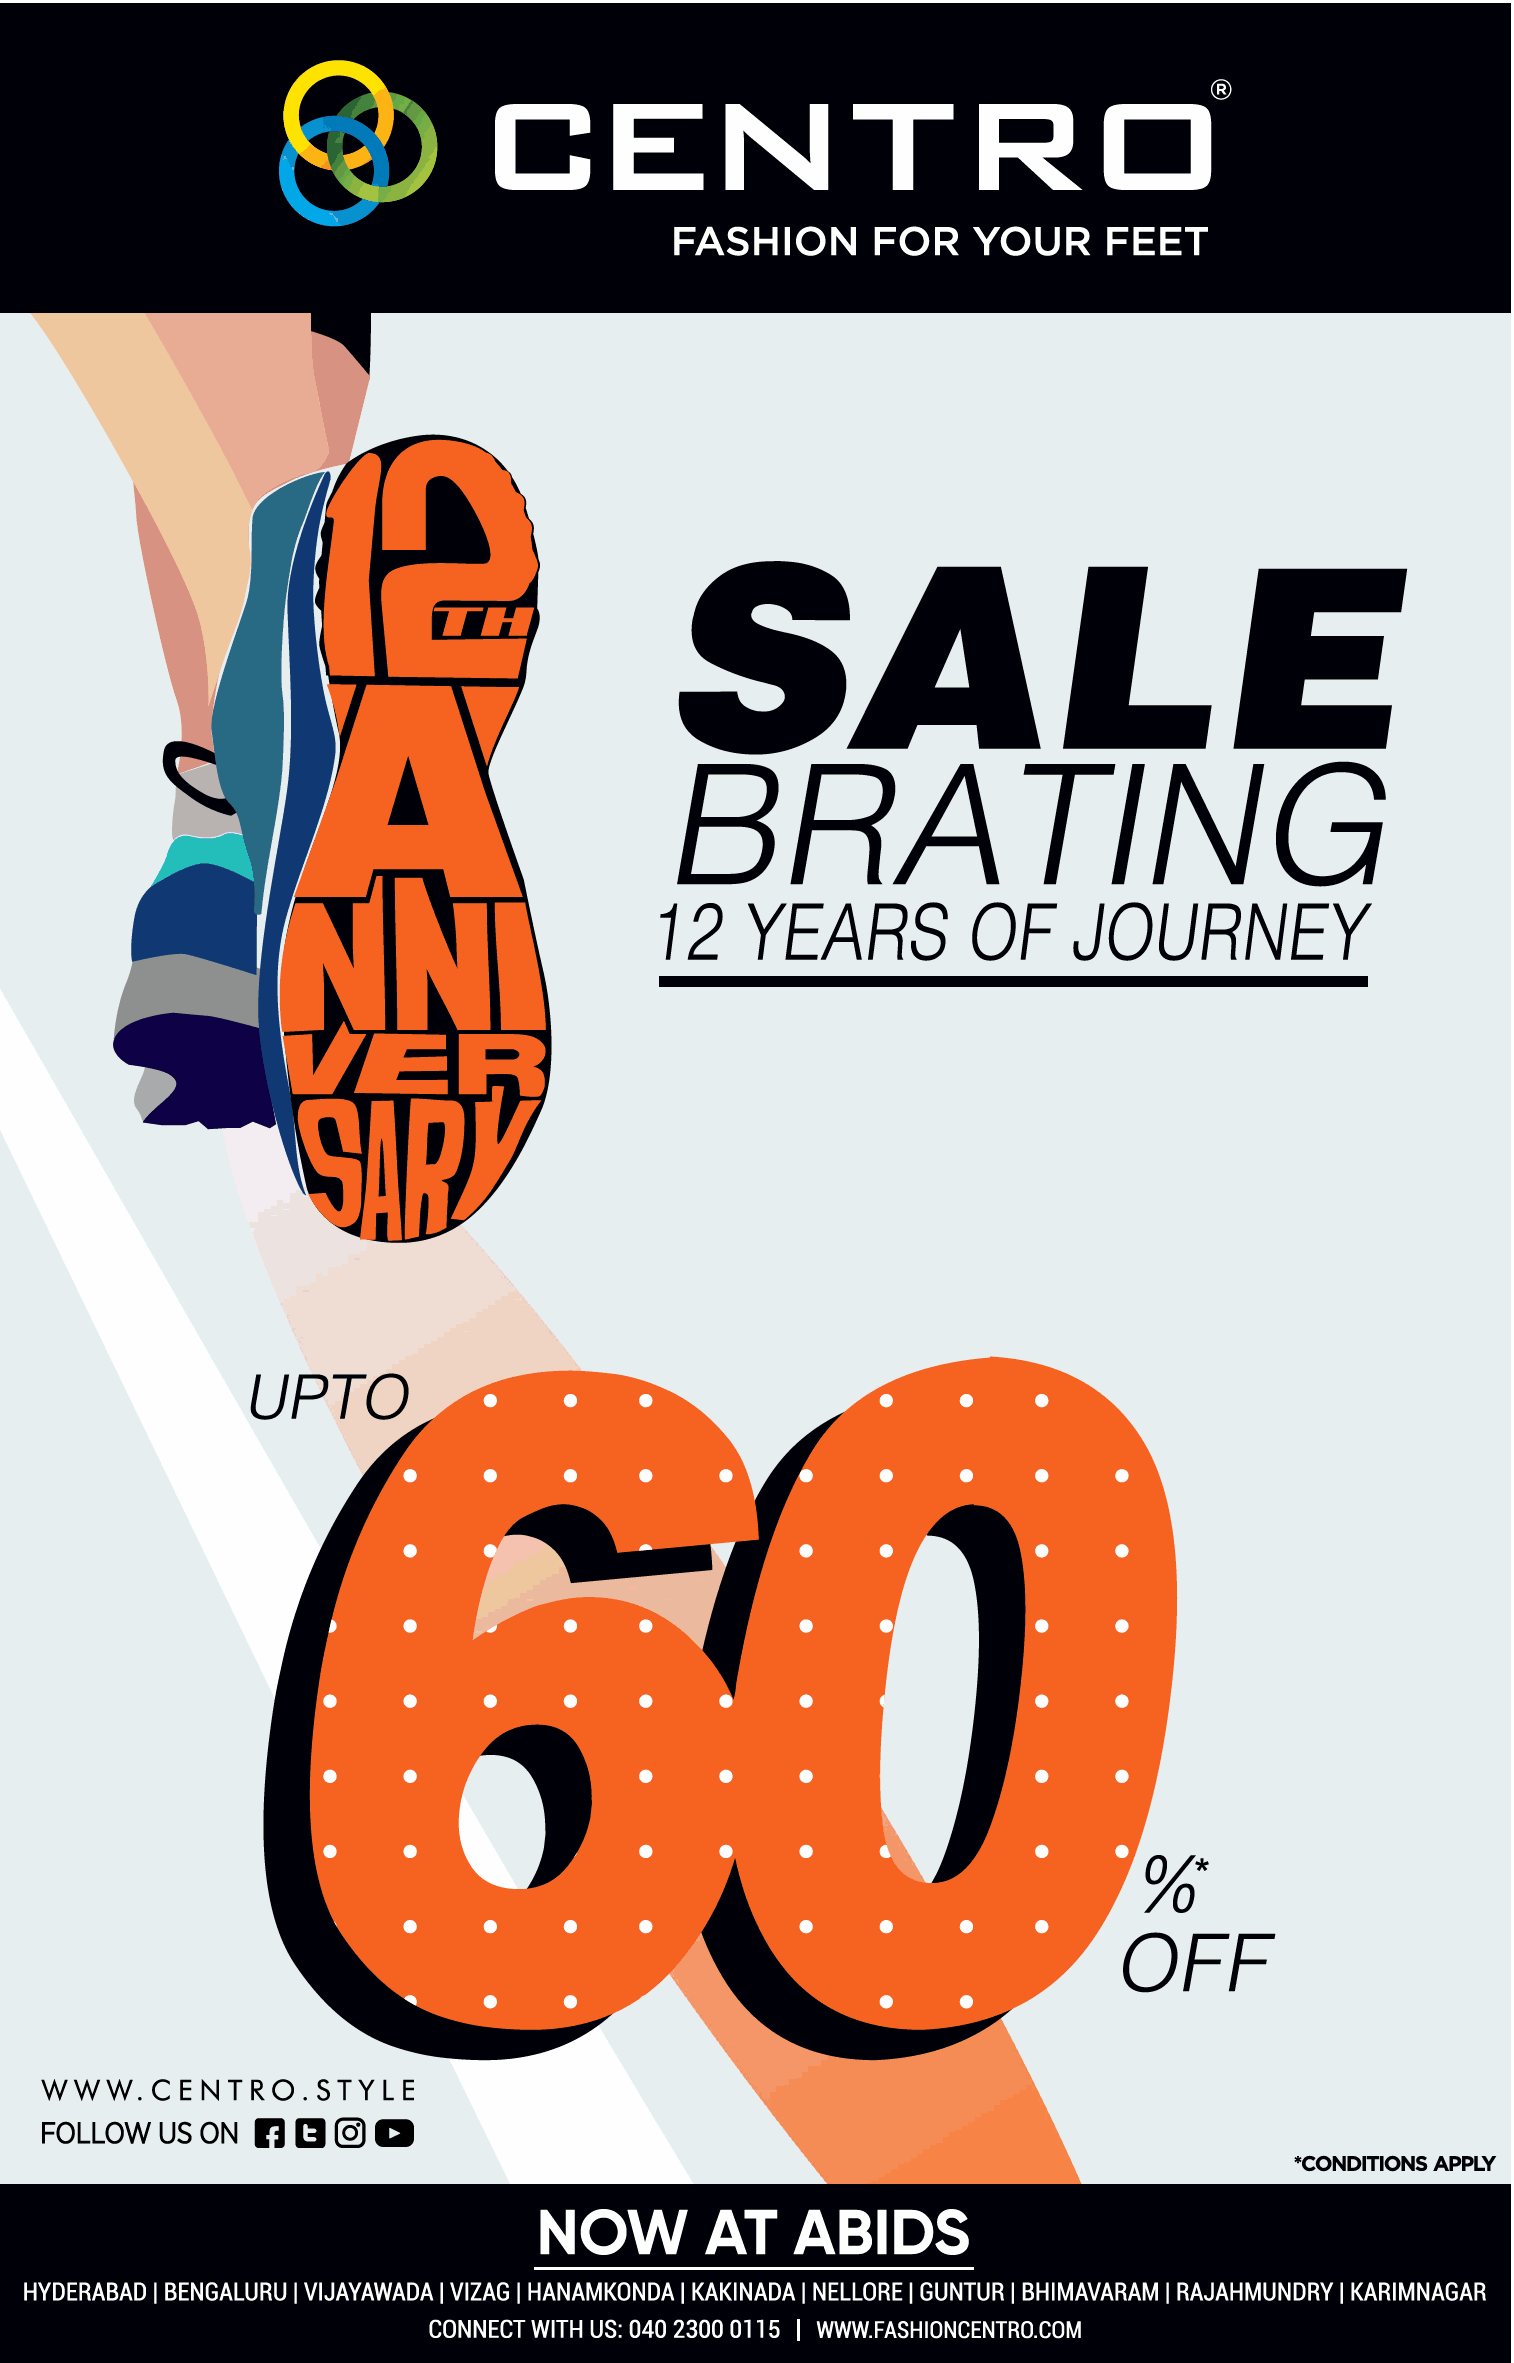 centro-footwear-sale-brating-12th-anniversary-upto-60%-off-ad-times-of-india-hyderabad-9-7-2021